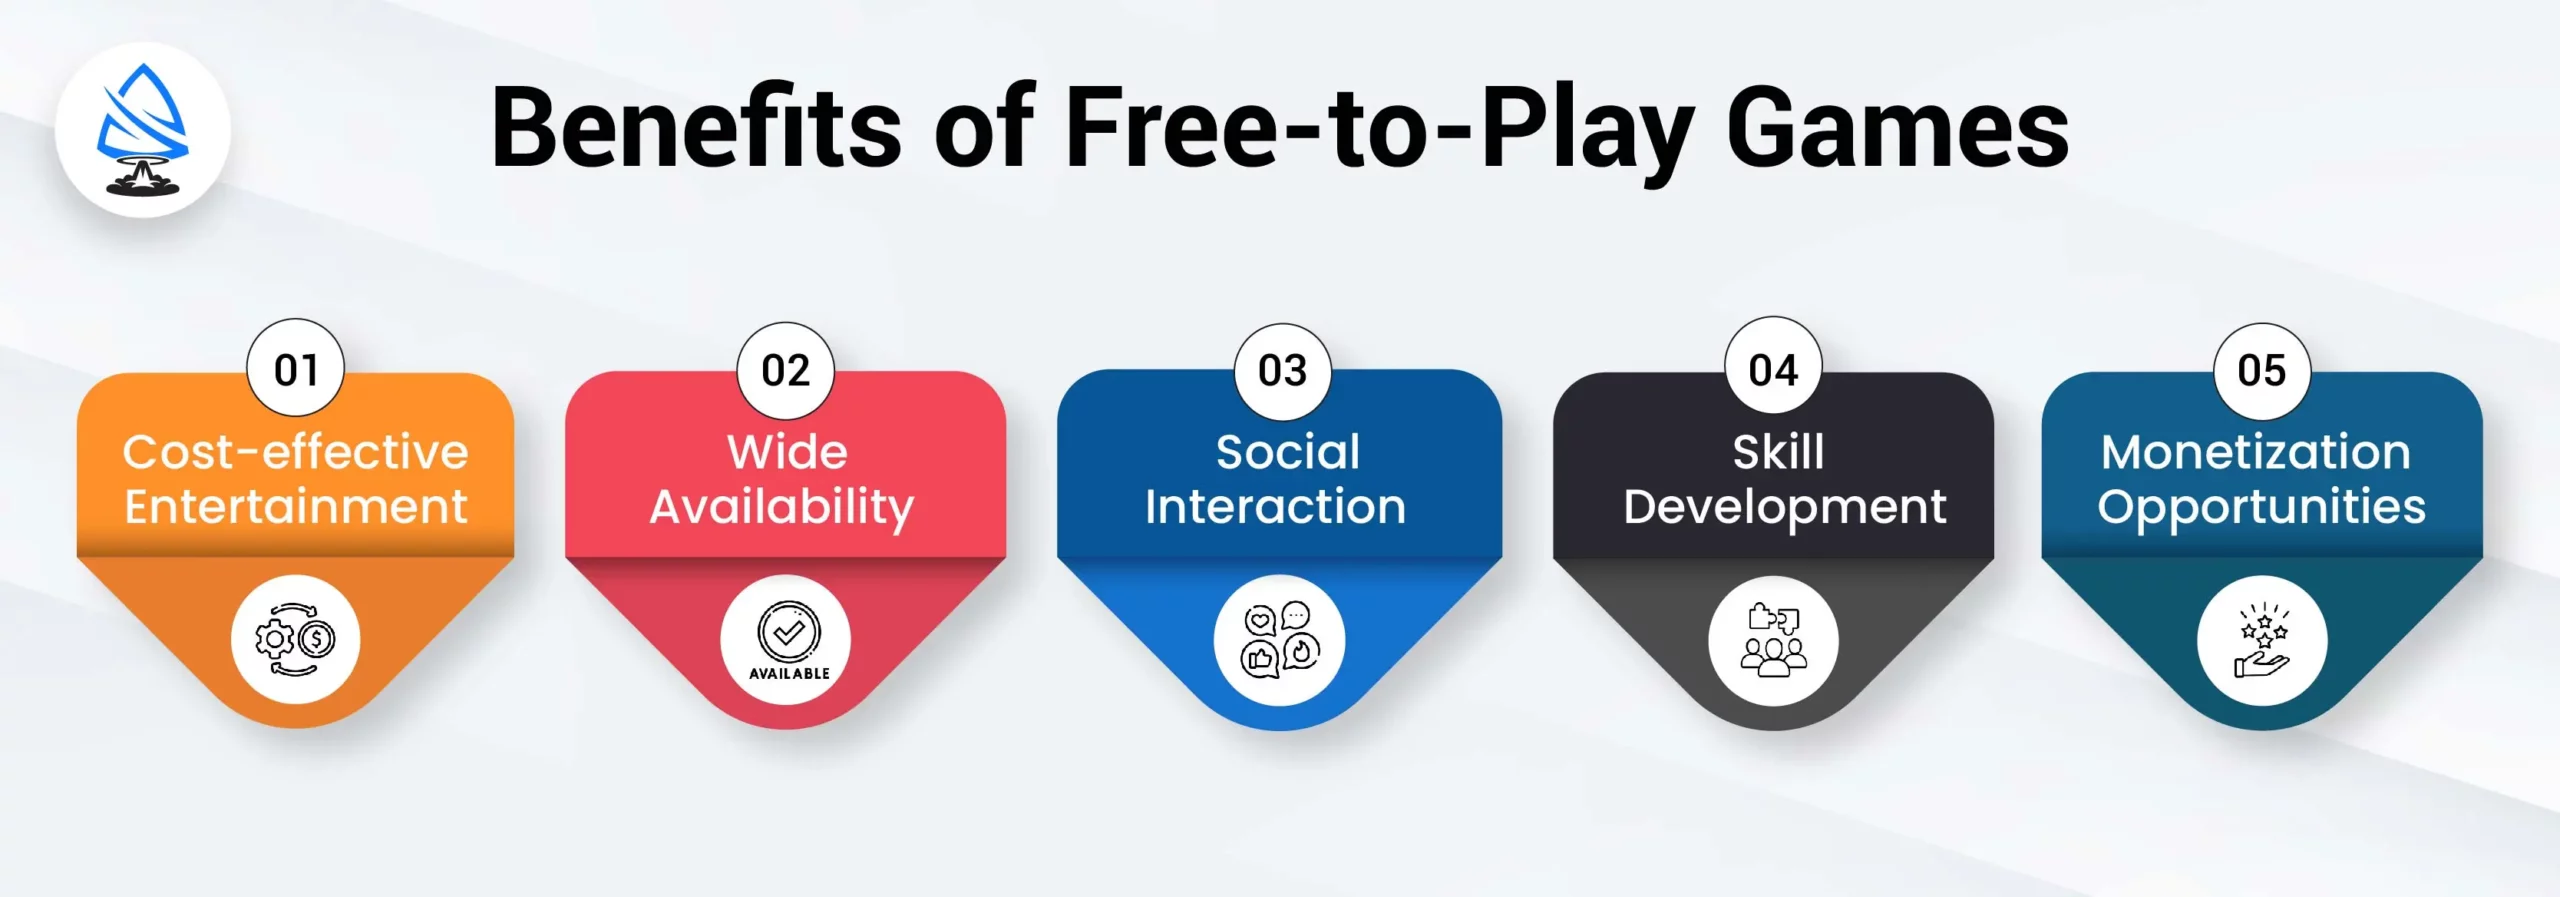 Benefits of Free-to-Play Games 